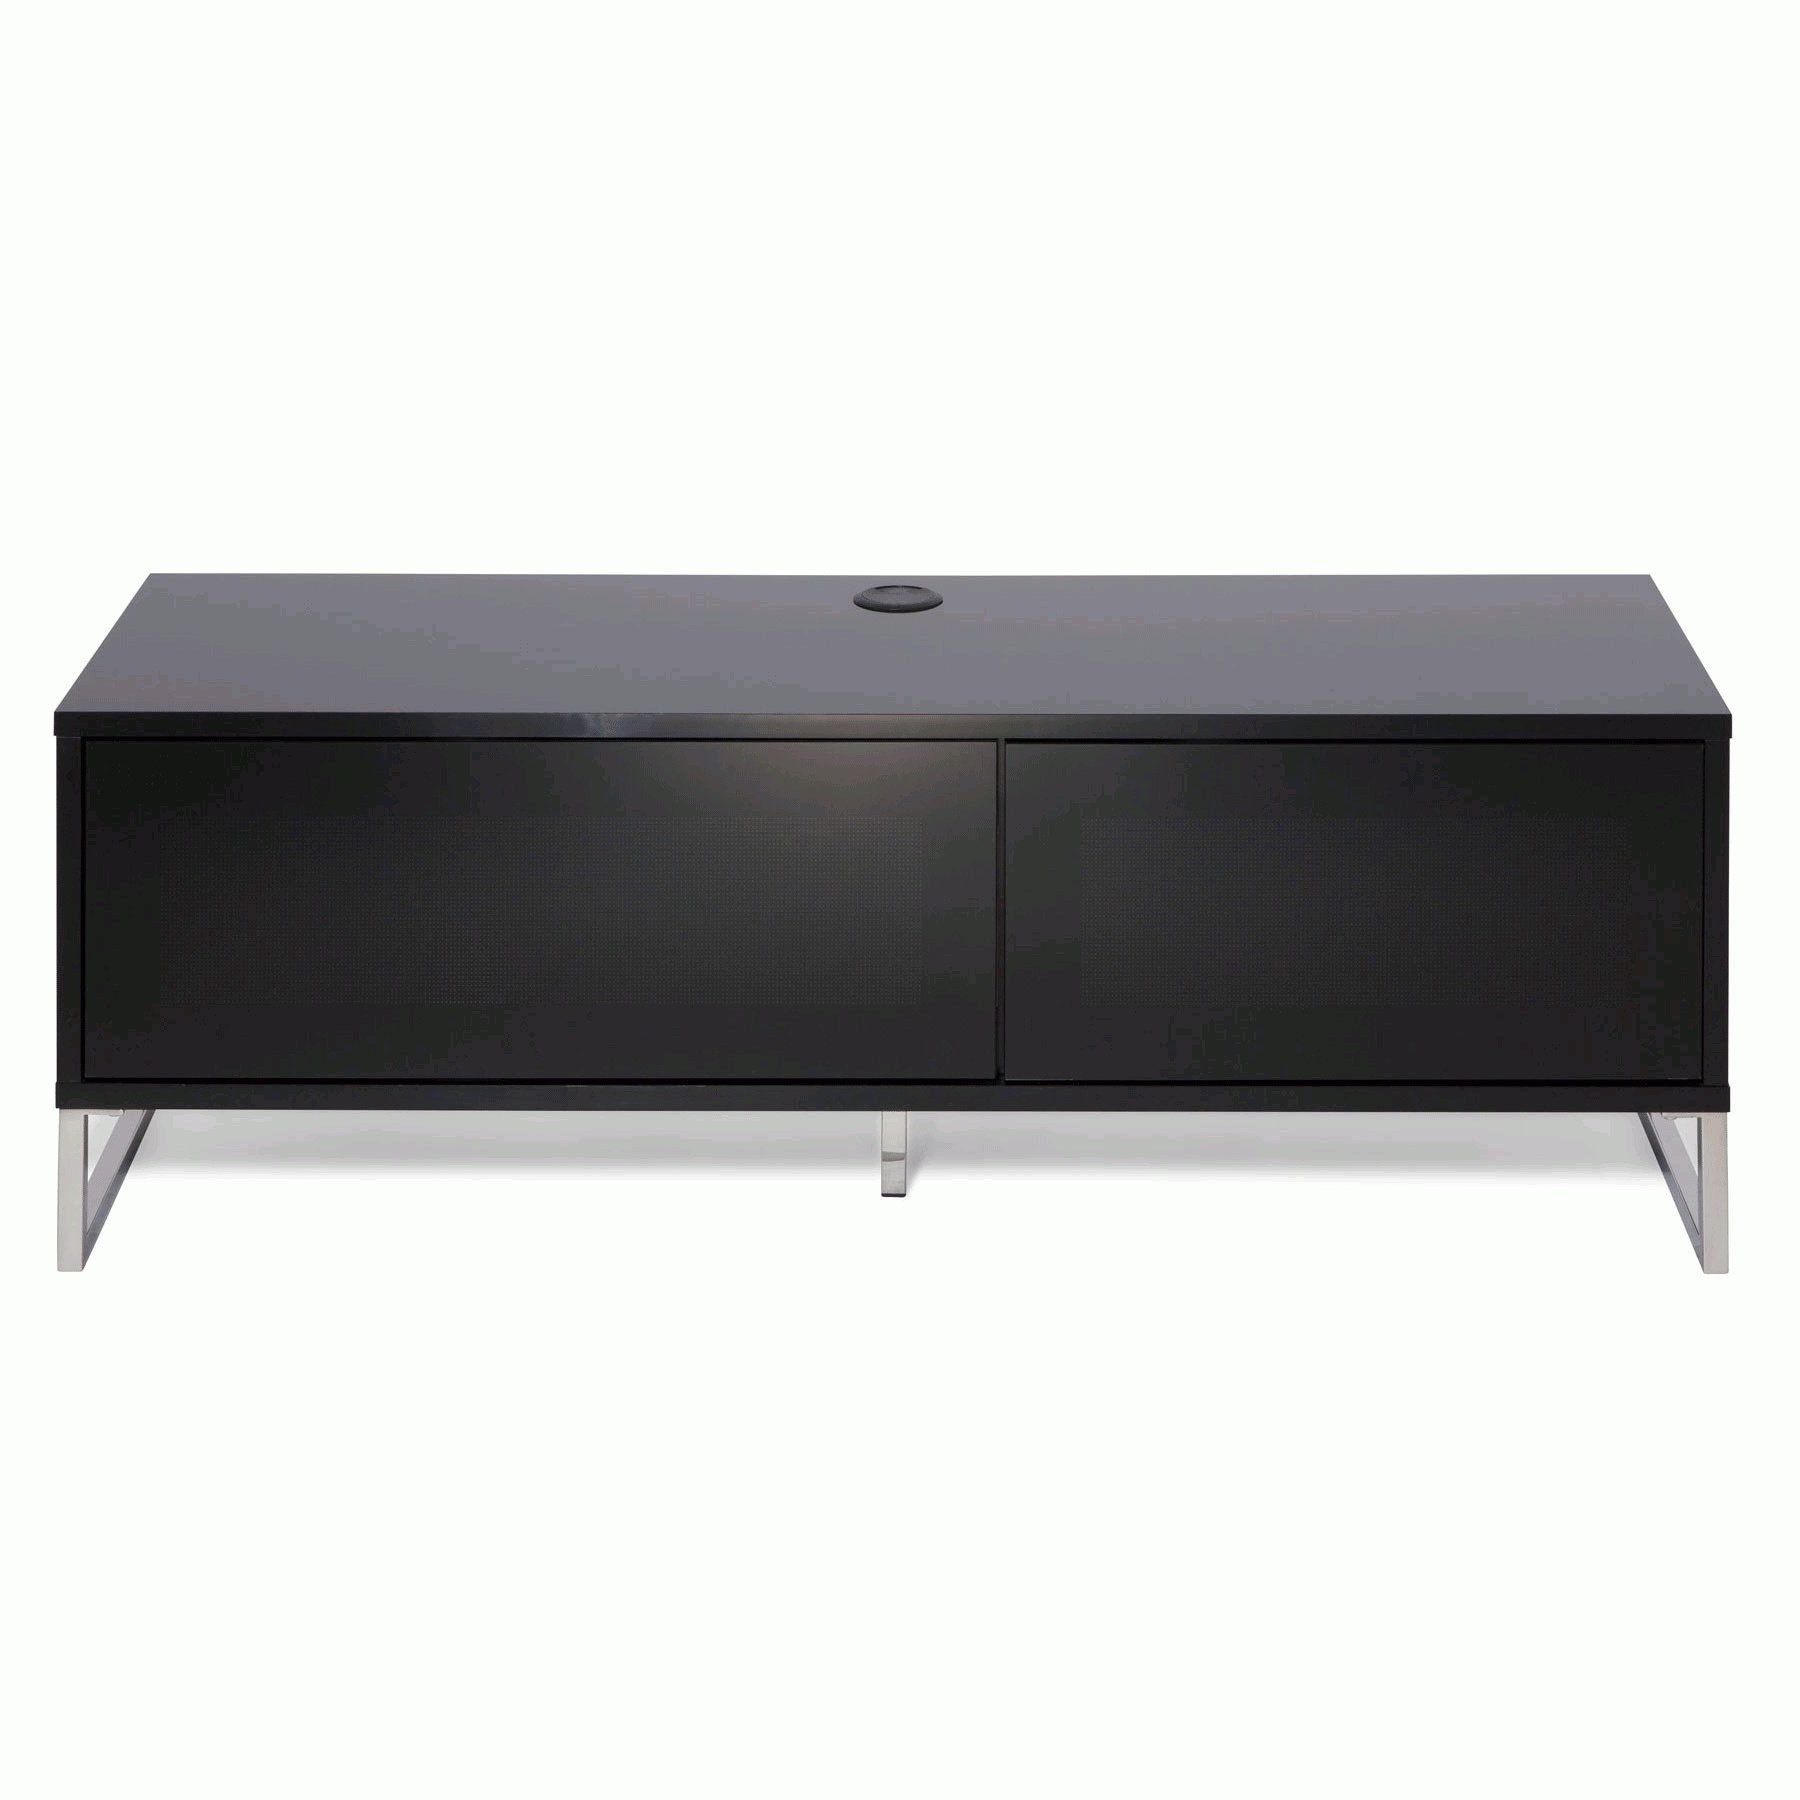 Alphason Helium 120cm Black Tv Stand For Up To 50" Tvs For Tv Stands For Tvs Up To 50" (View 14 of 20)